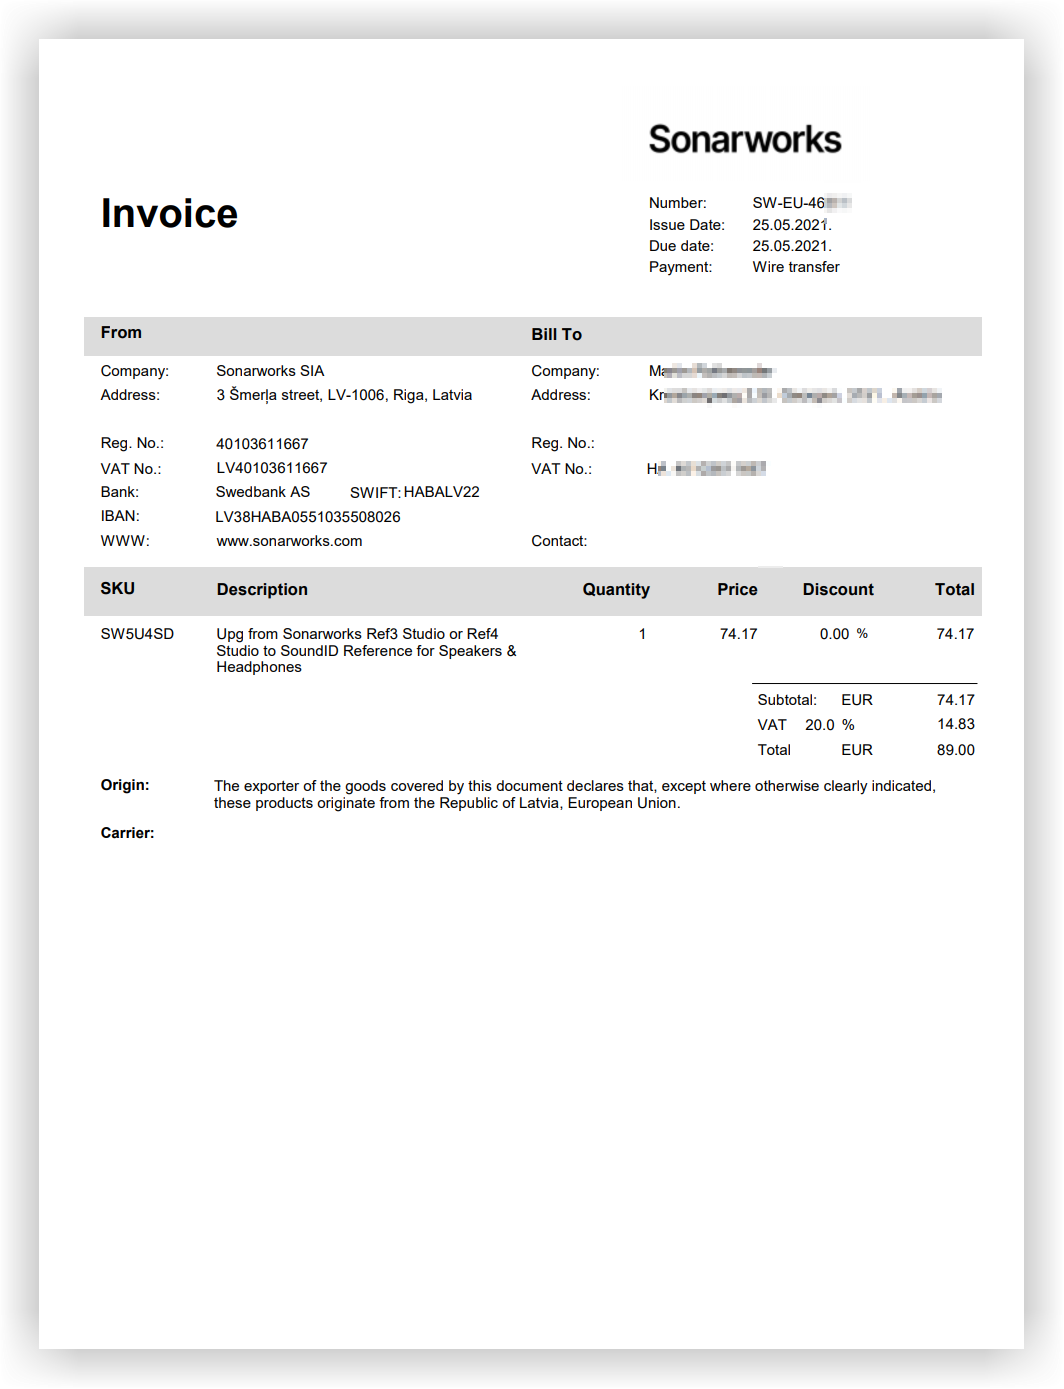 Sonarworks_Store_-_Invoice_example.PNG